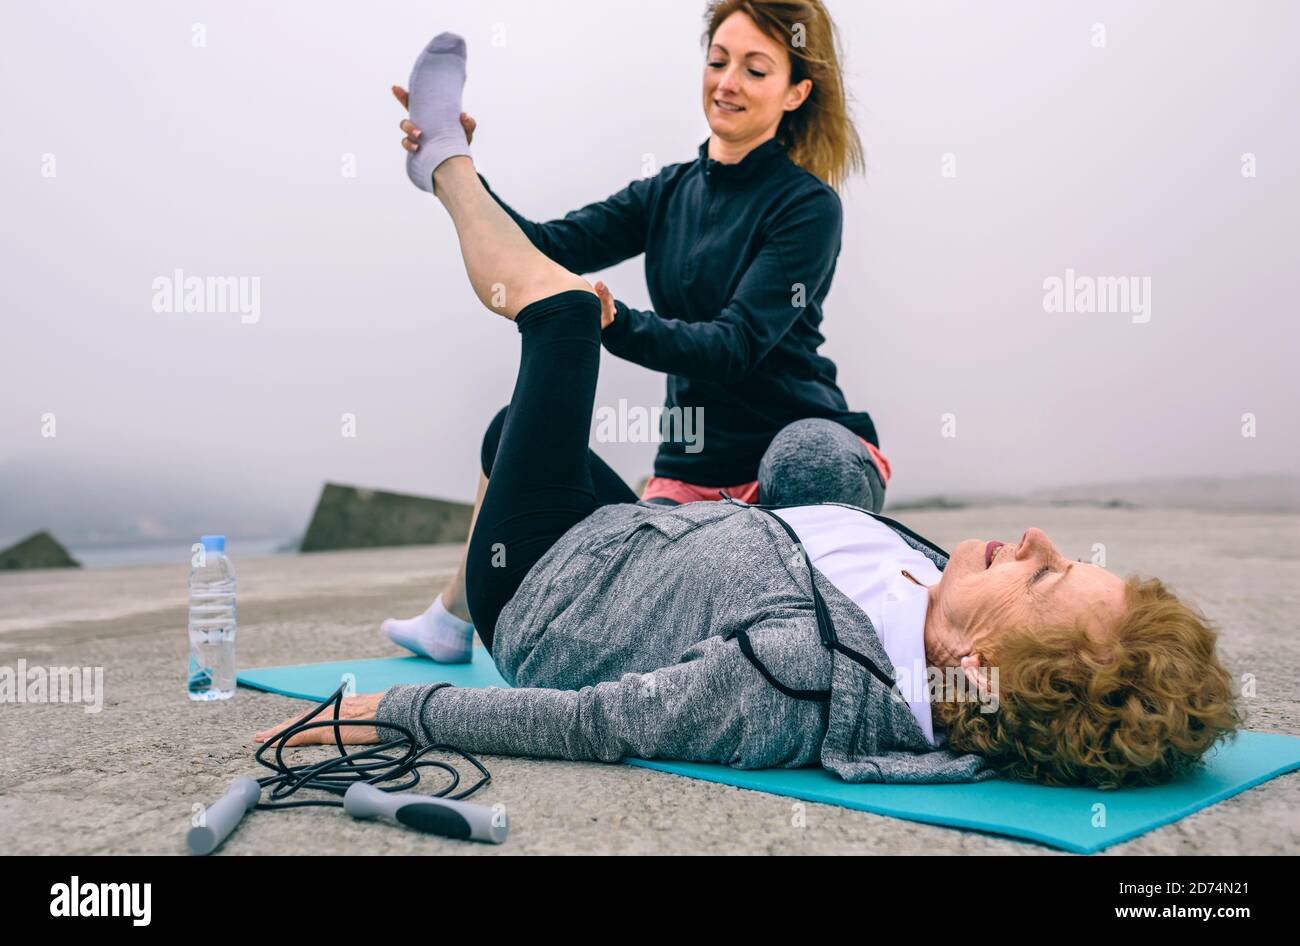 Senior woman with personal trainer Stock Photo